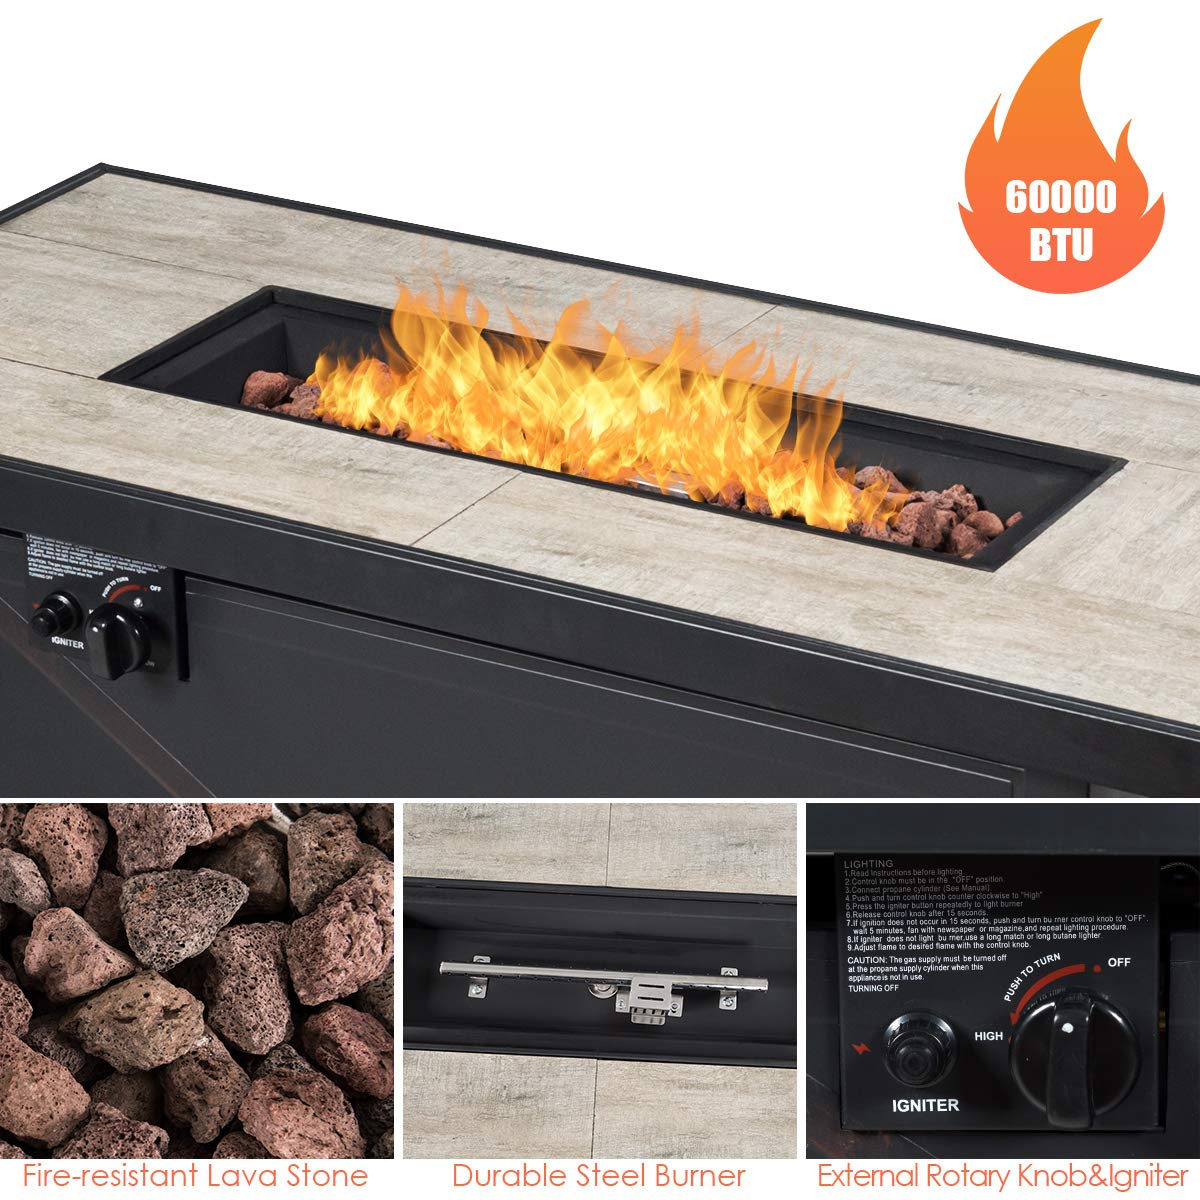 Giantex Gas Fire Pit Table w/ Ceramic Tabletop, 42 Inch 60,000 BTU Rectangular Propane Fire Pit Table